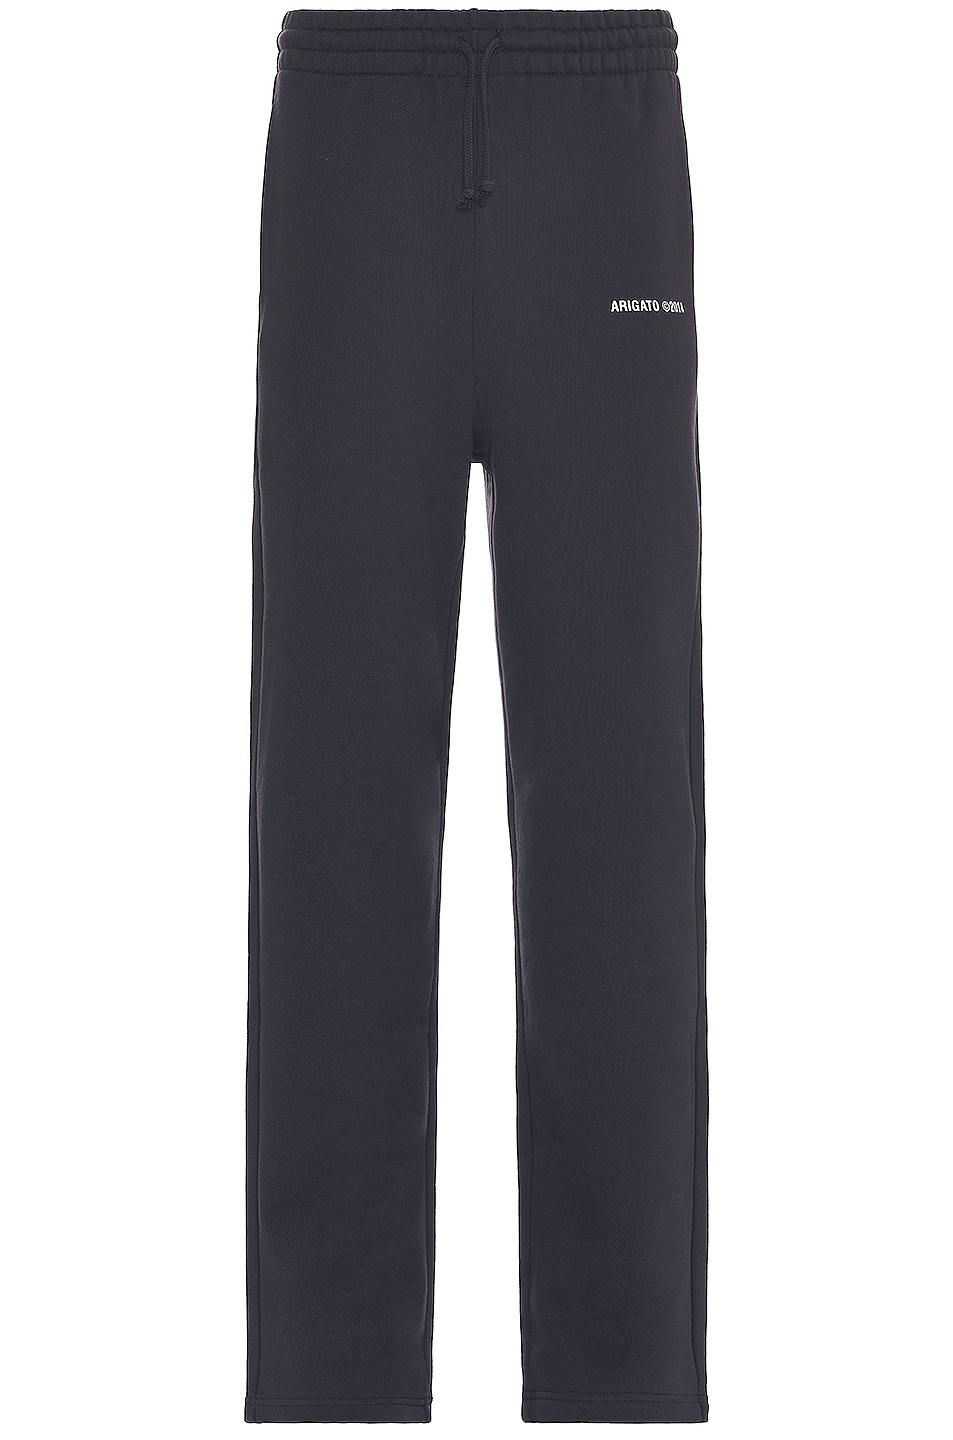 Image 1 of Axel Arigato London Sweatpants in Faded Black